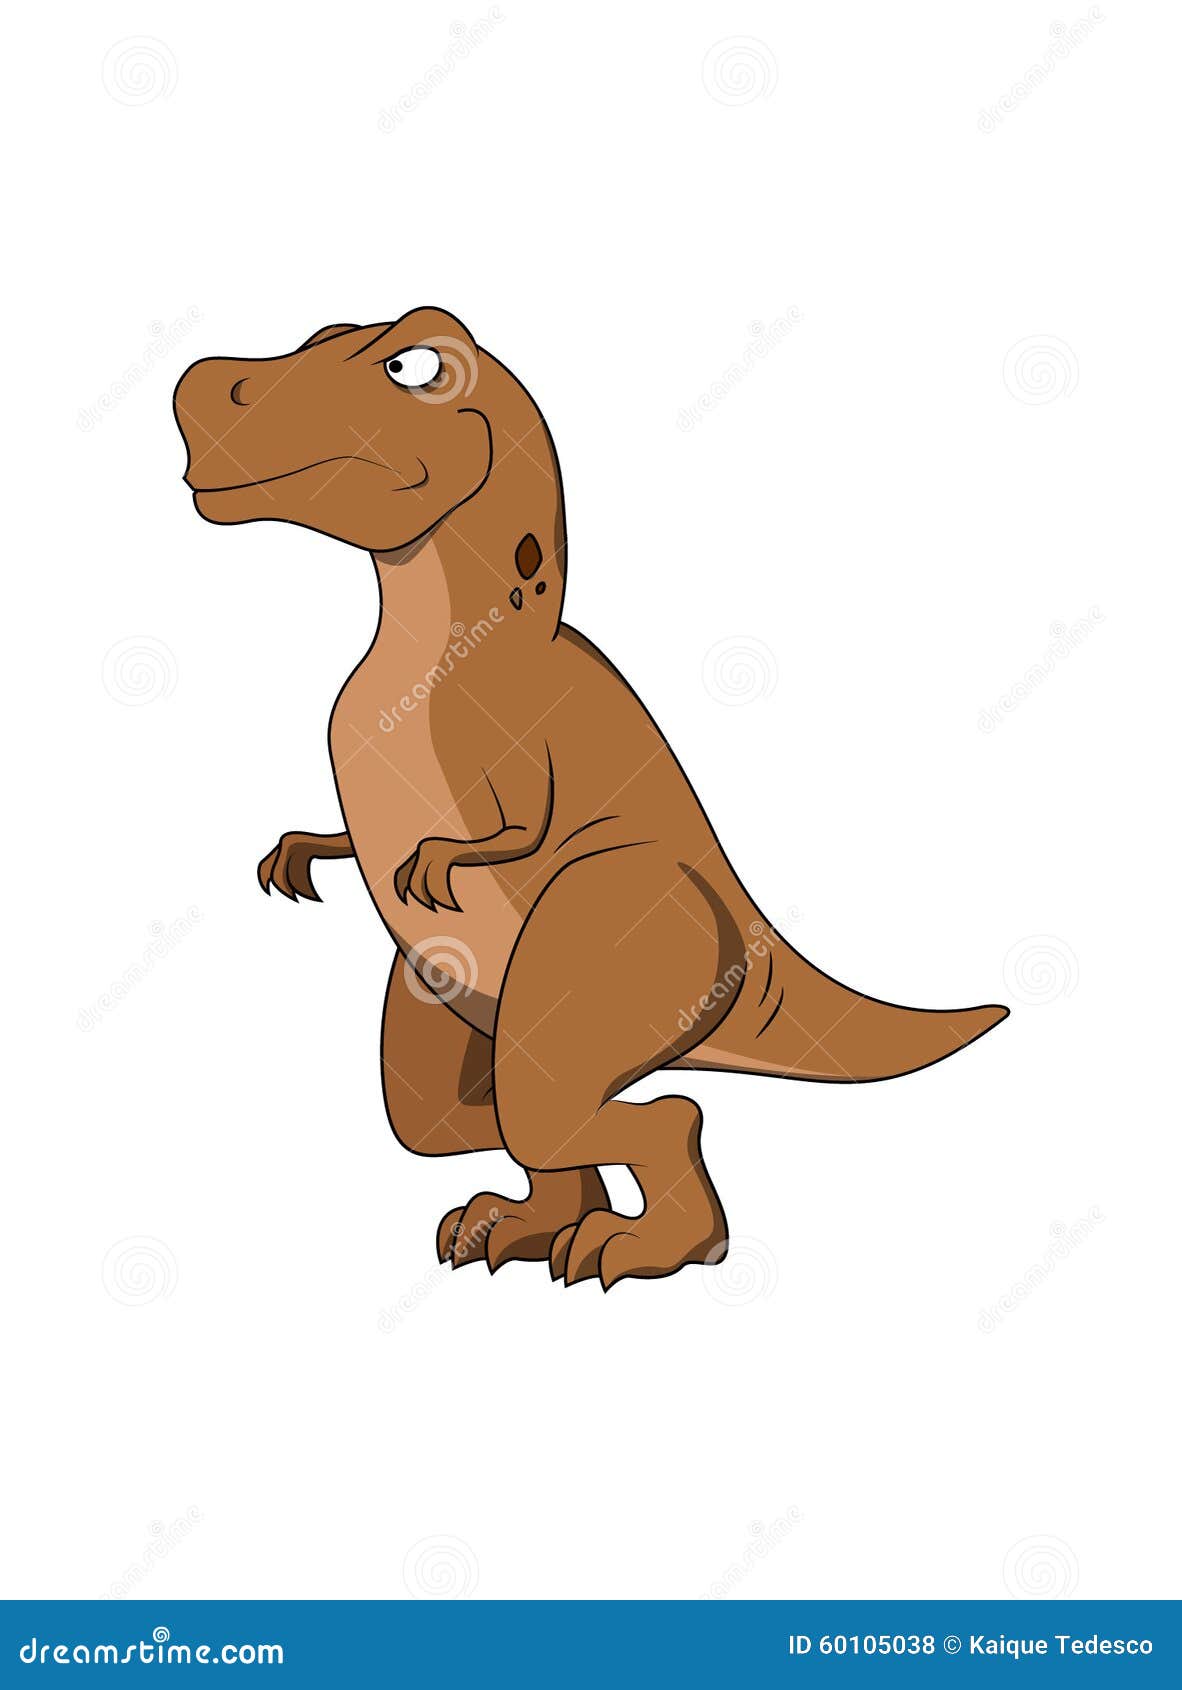 A tattoo design of a dinosaur on a skateboard riding in space. The T Rex  would be depicted in a dynamic pose, standing on the skateboard with its  legs slightly bent and